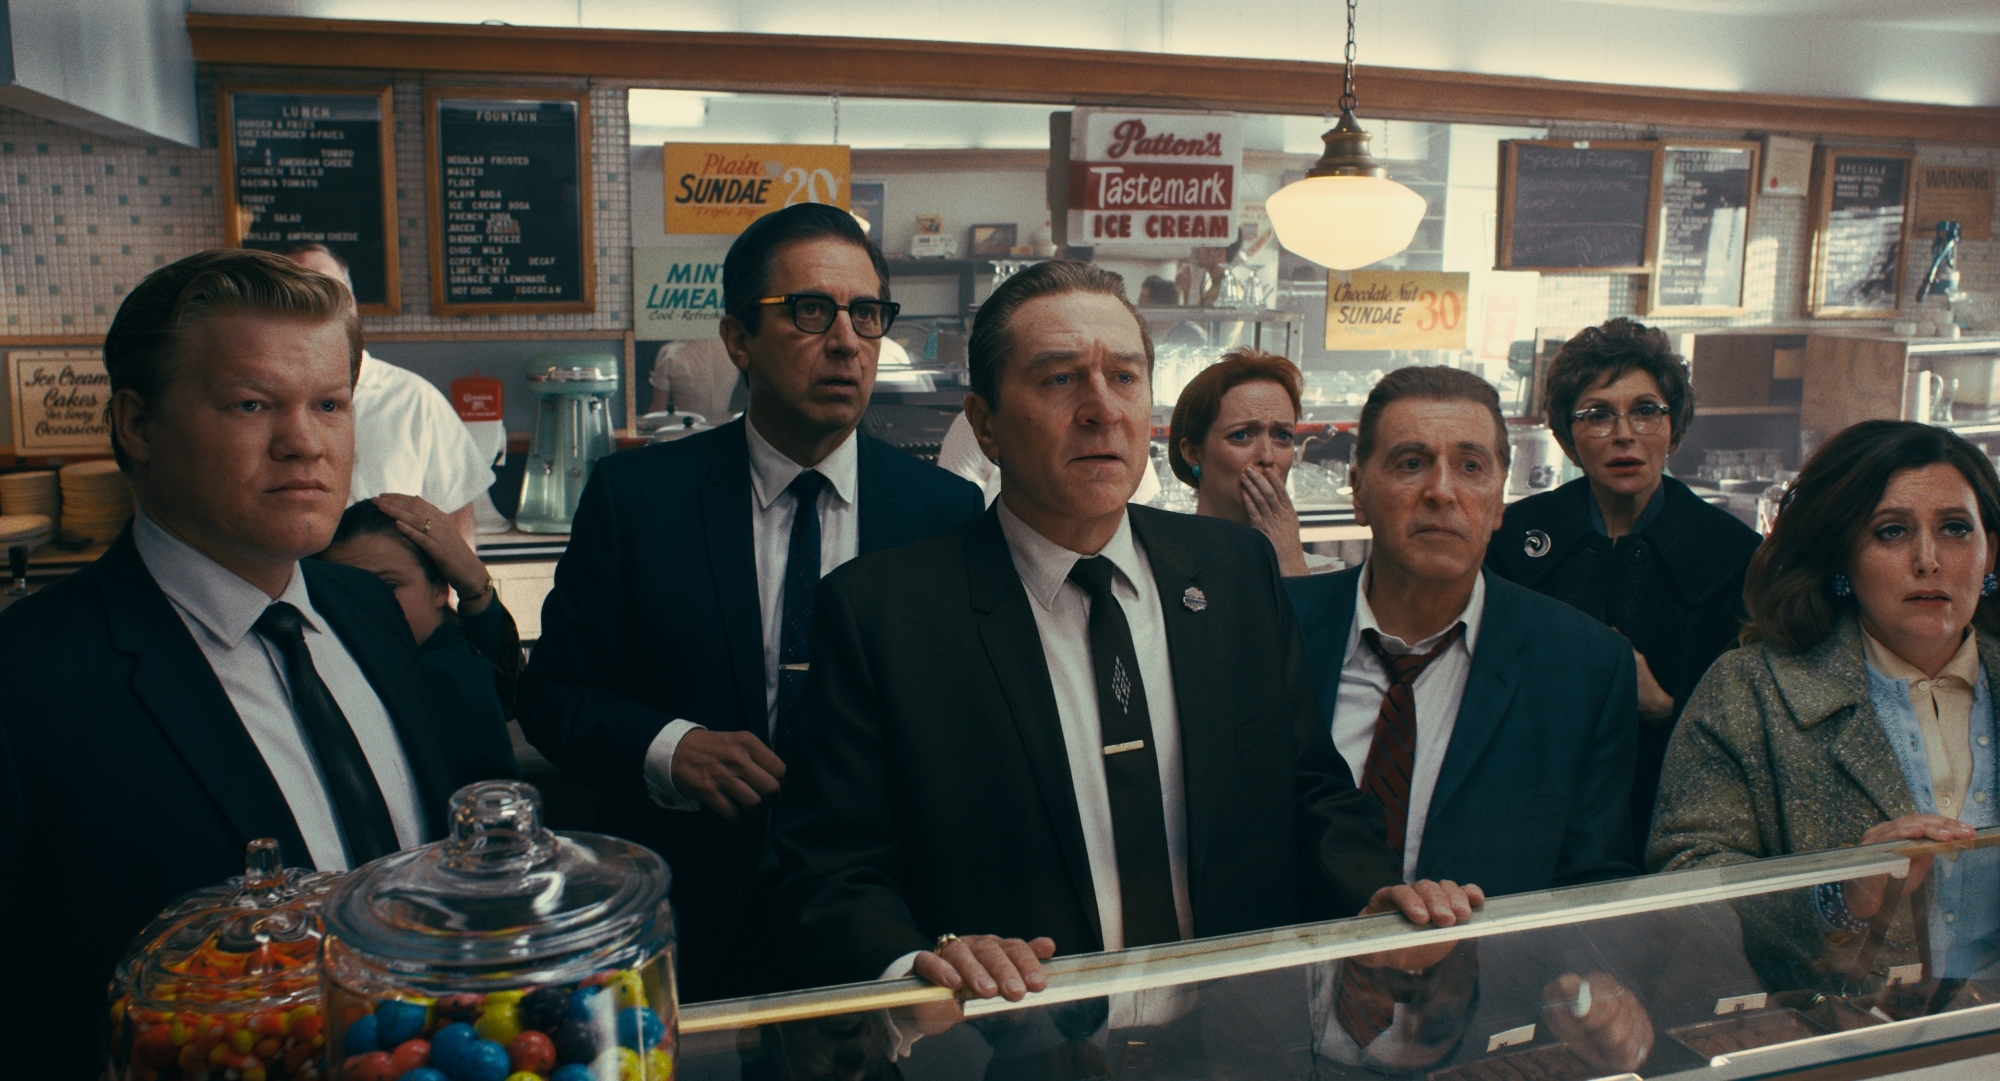 (From l to r) During a break in the trial of Jimmy Hoffa, Chuckie O’Brien (Jesse Plemons), Bill Bufalino (Ray Romano), Frank Sheeran (Robert De Niro) and Hoffa (Al Pacino) are shocked at the news of JFK’s assassination. © 2019 Netlfix US, LLC. All rights reserved.